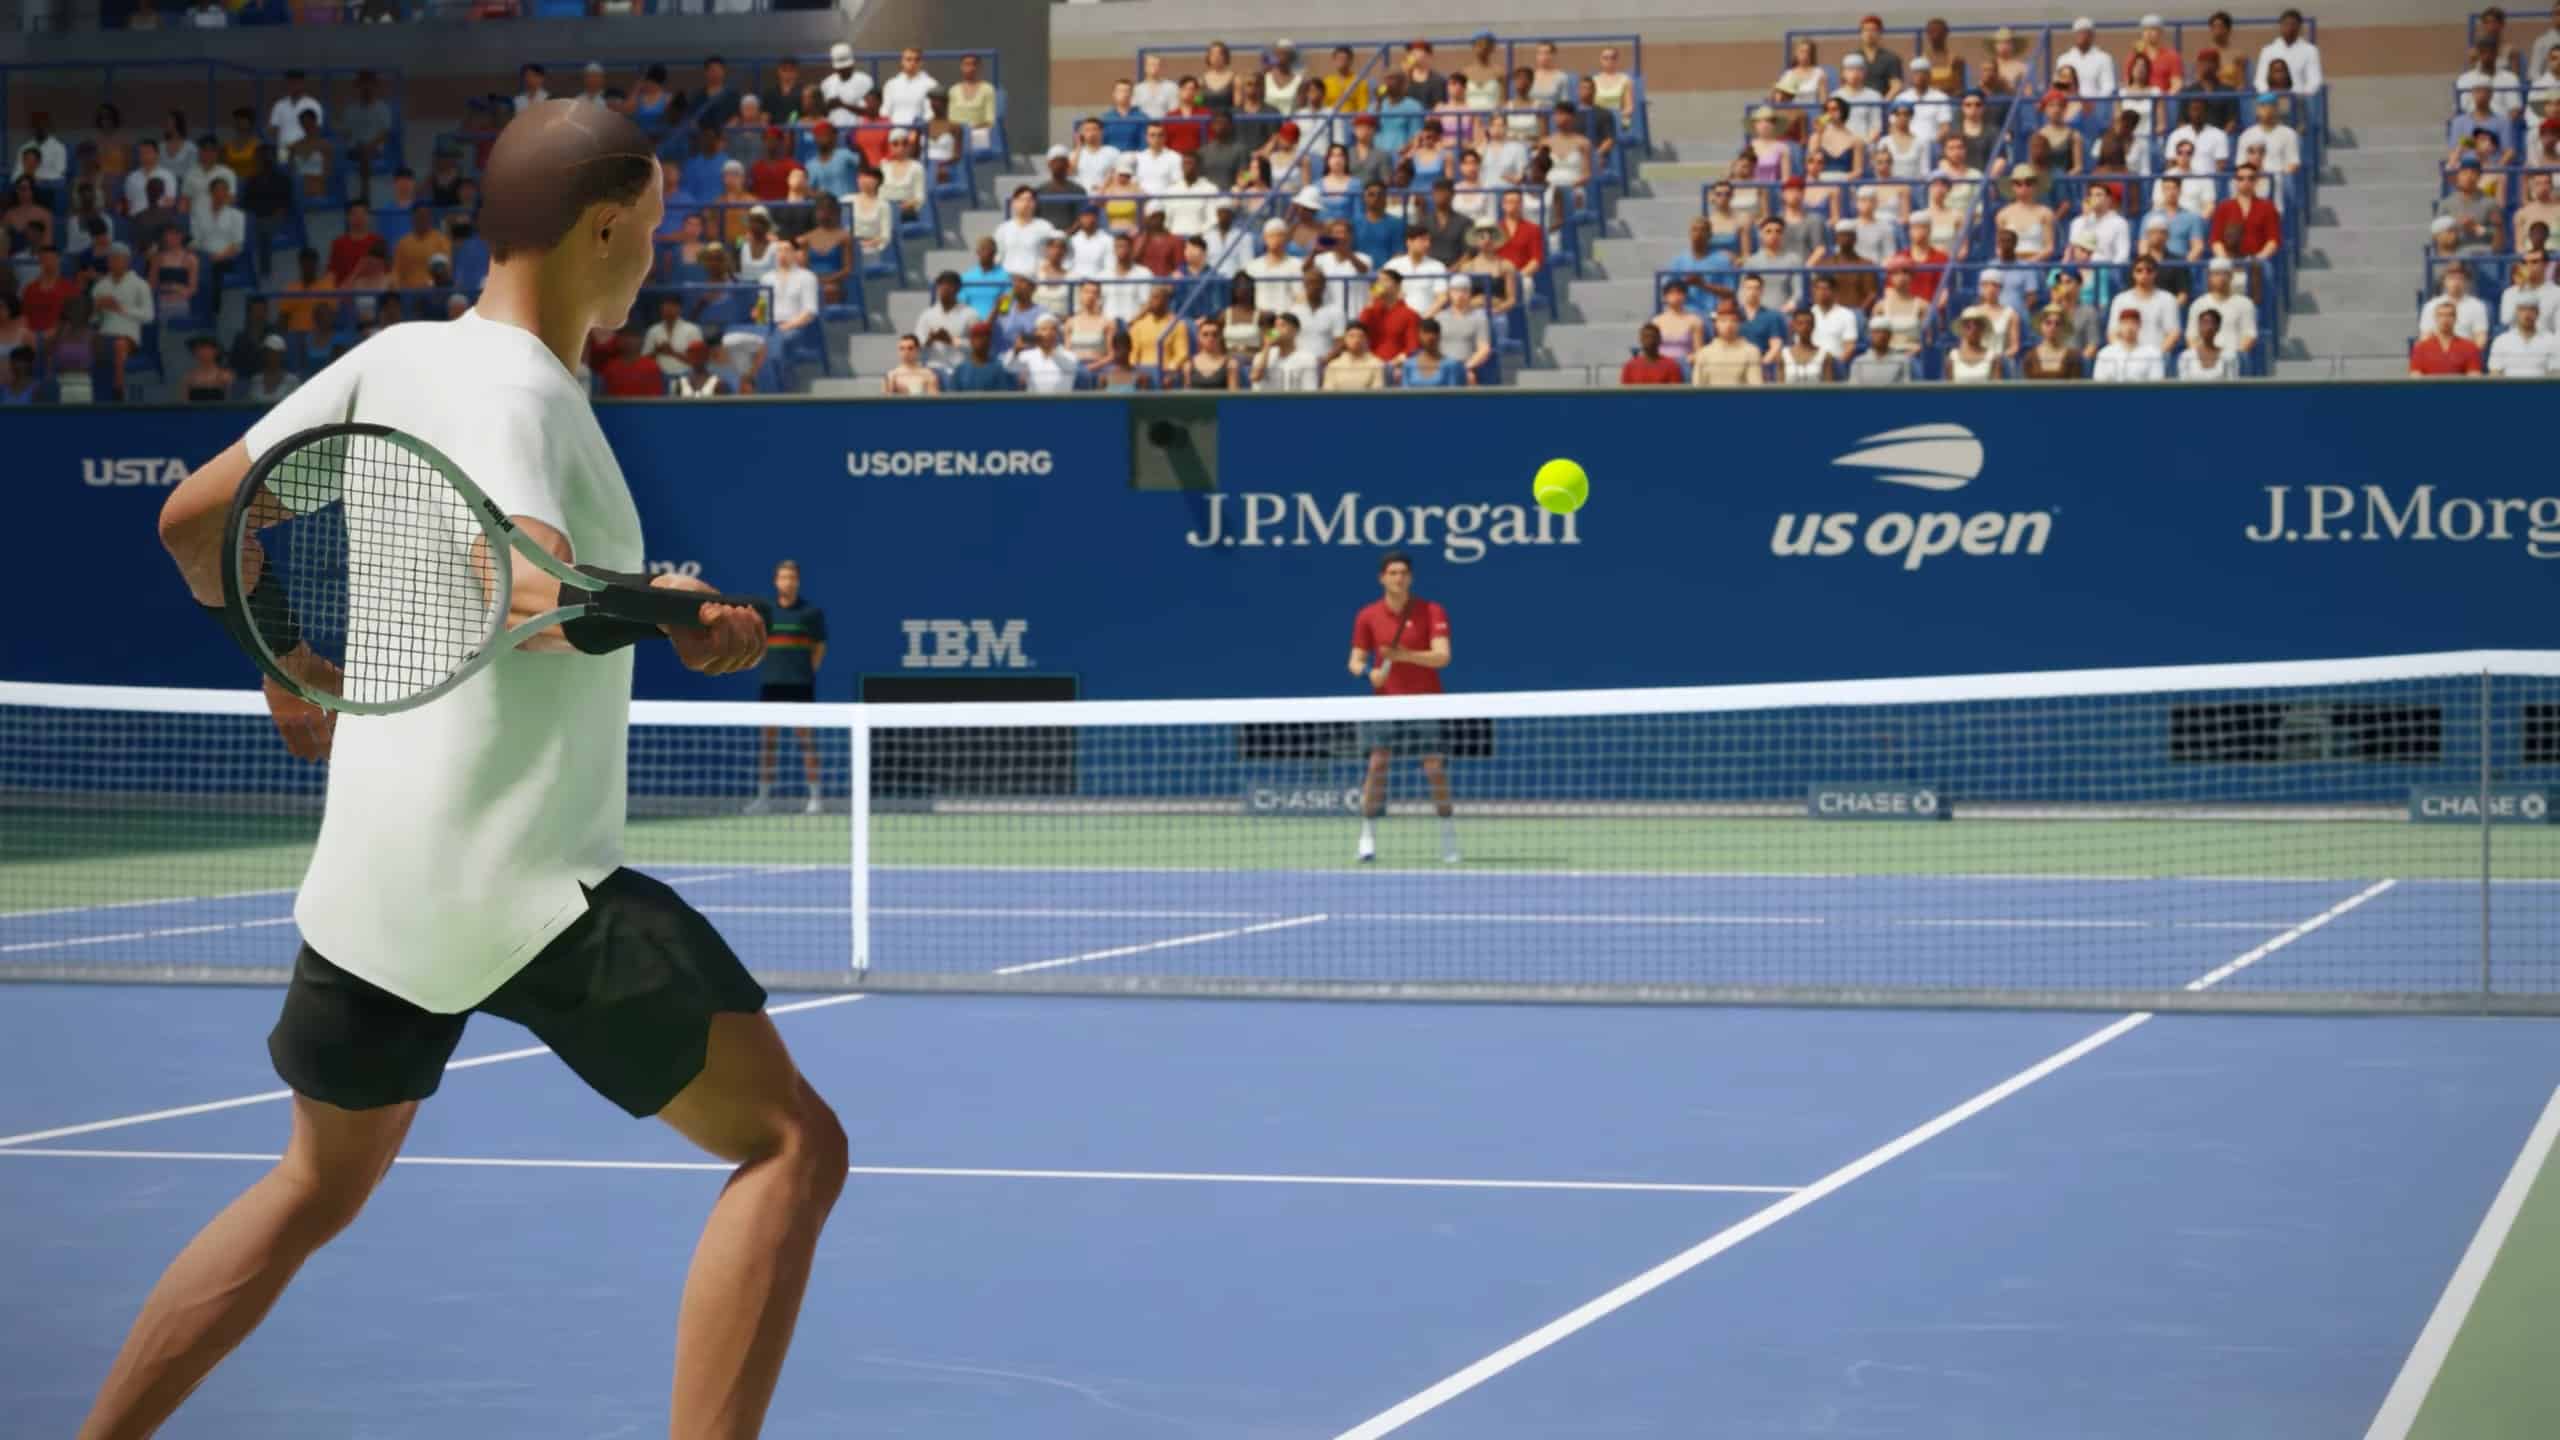 TopSpin 2K25 release date: Two players during a match at the US Open.